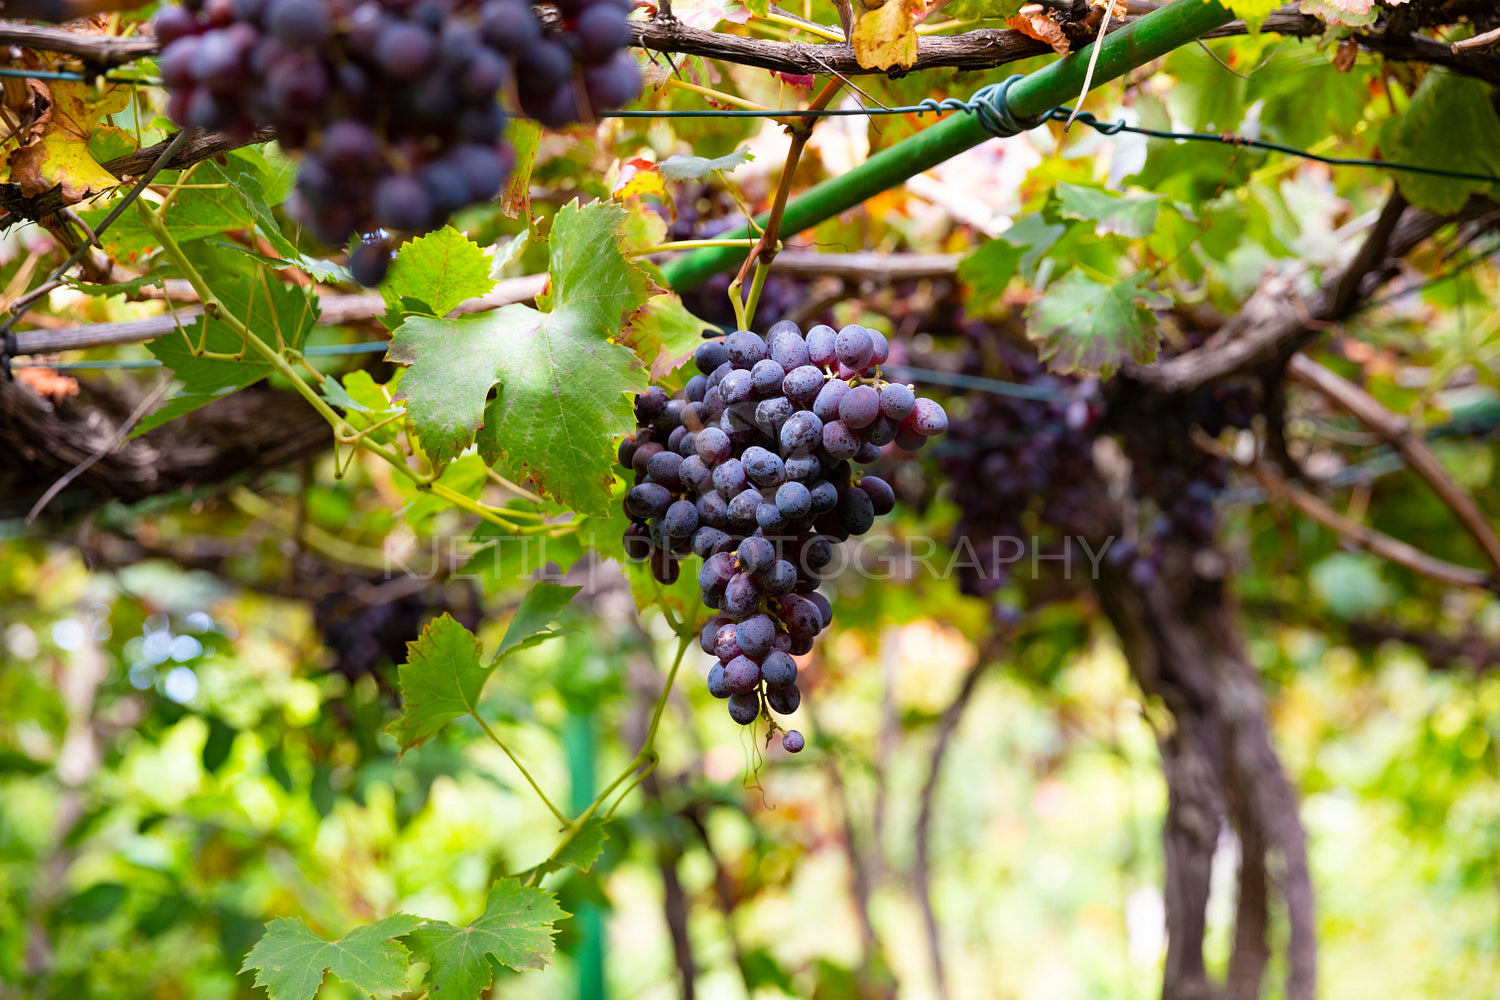 Many Organic Bunches of Grapes for Wine Production Growing At Vineyard